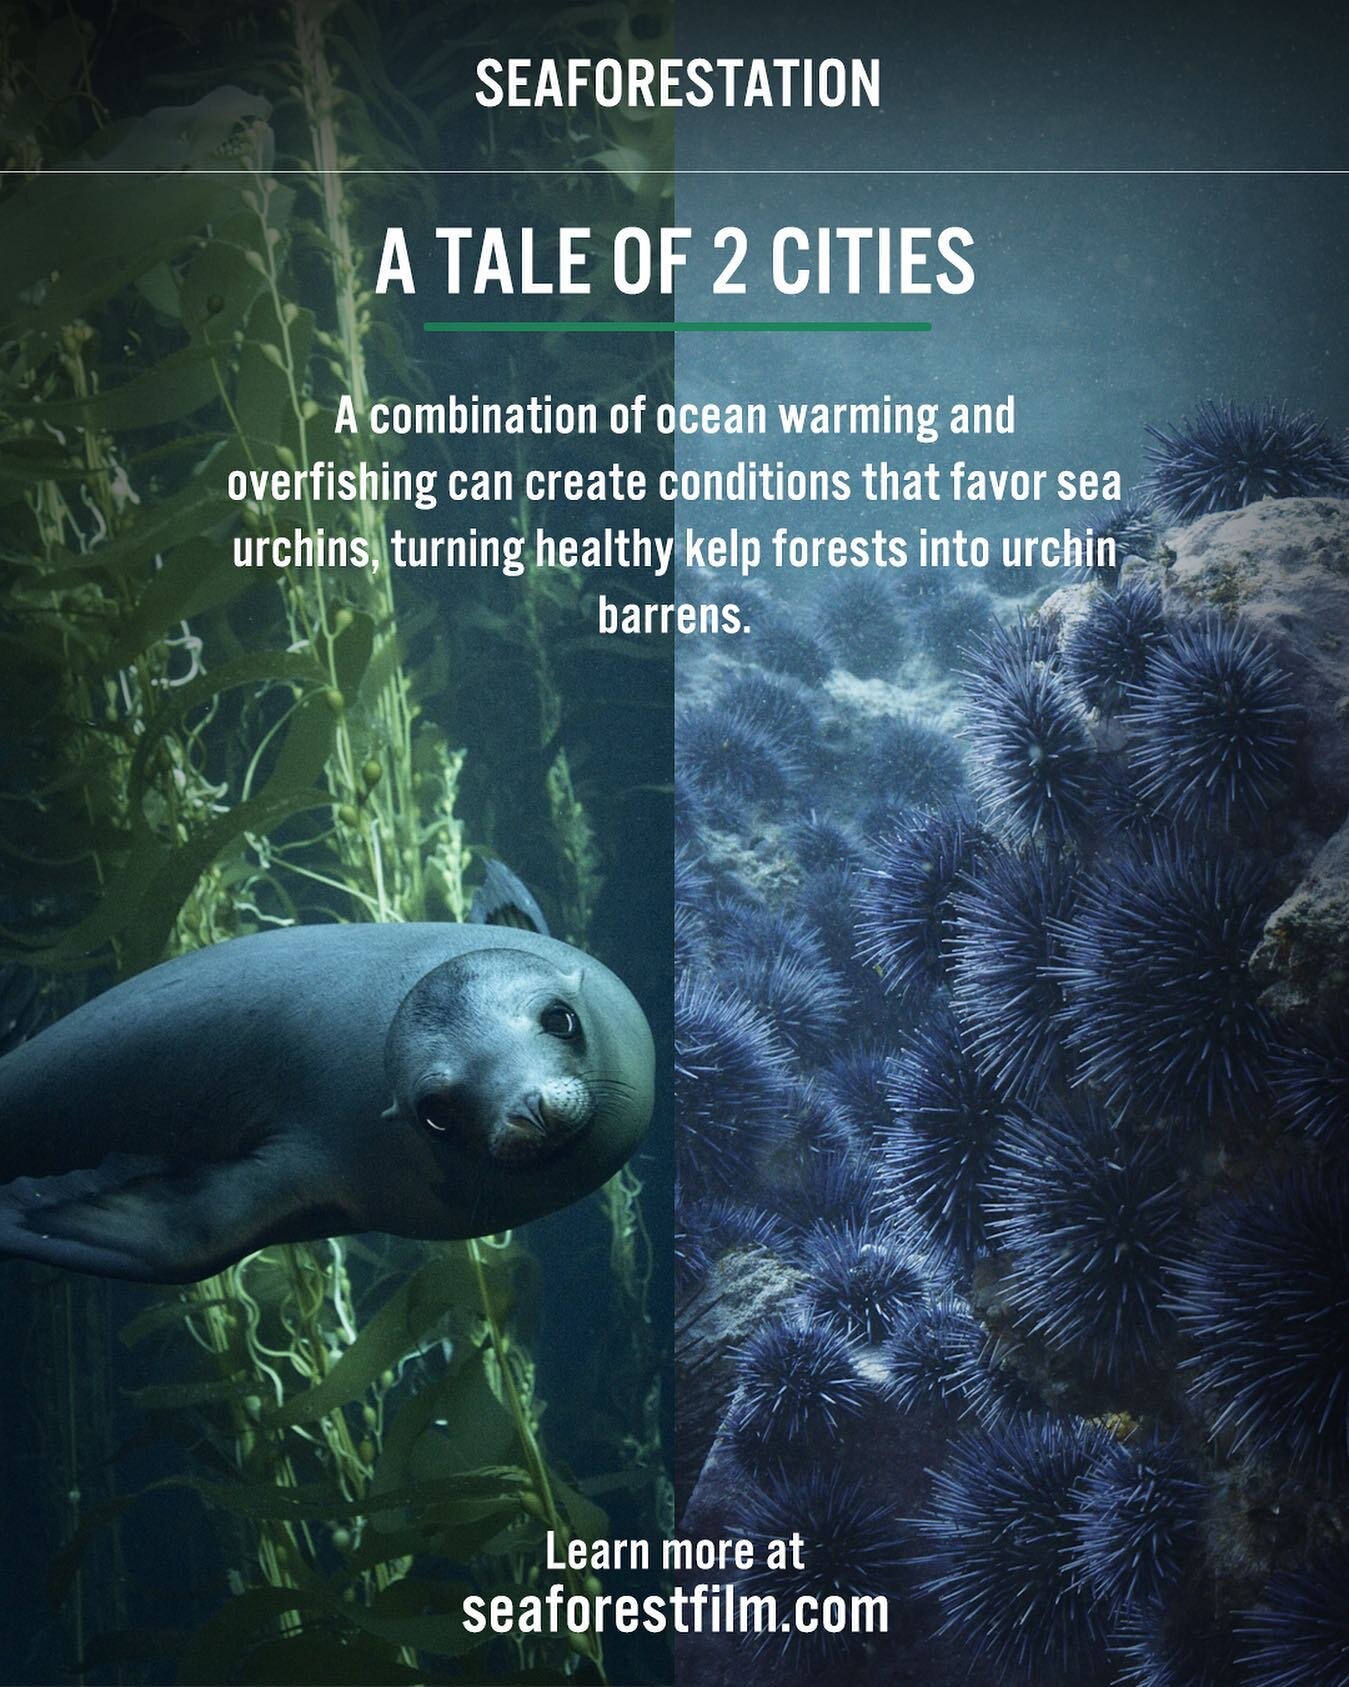 Urchin barrens are areas where urchins have overgrazed entire kelp forest ecosystems. Many factors can lead to this habitat transformation. Some causes are:

1. Ocean Warming: As oceans warm and marine heatwaves increase with frequency and intensity,